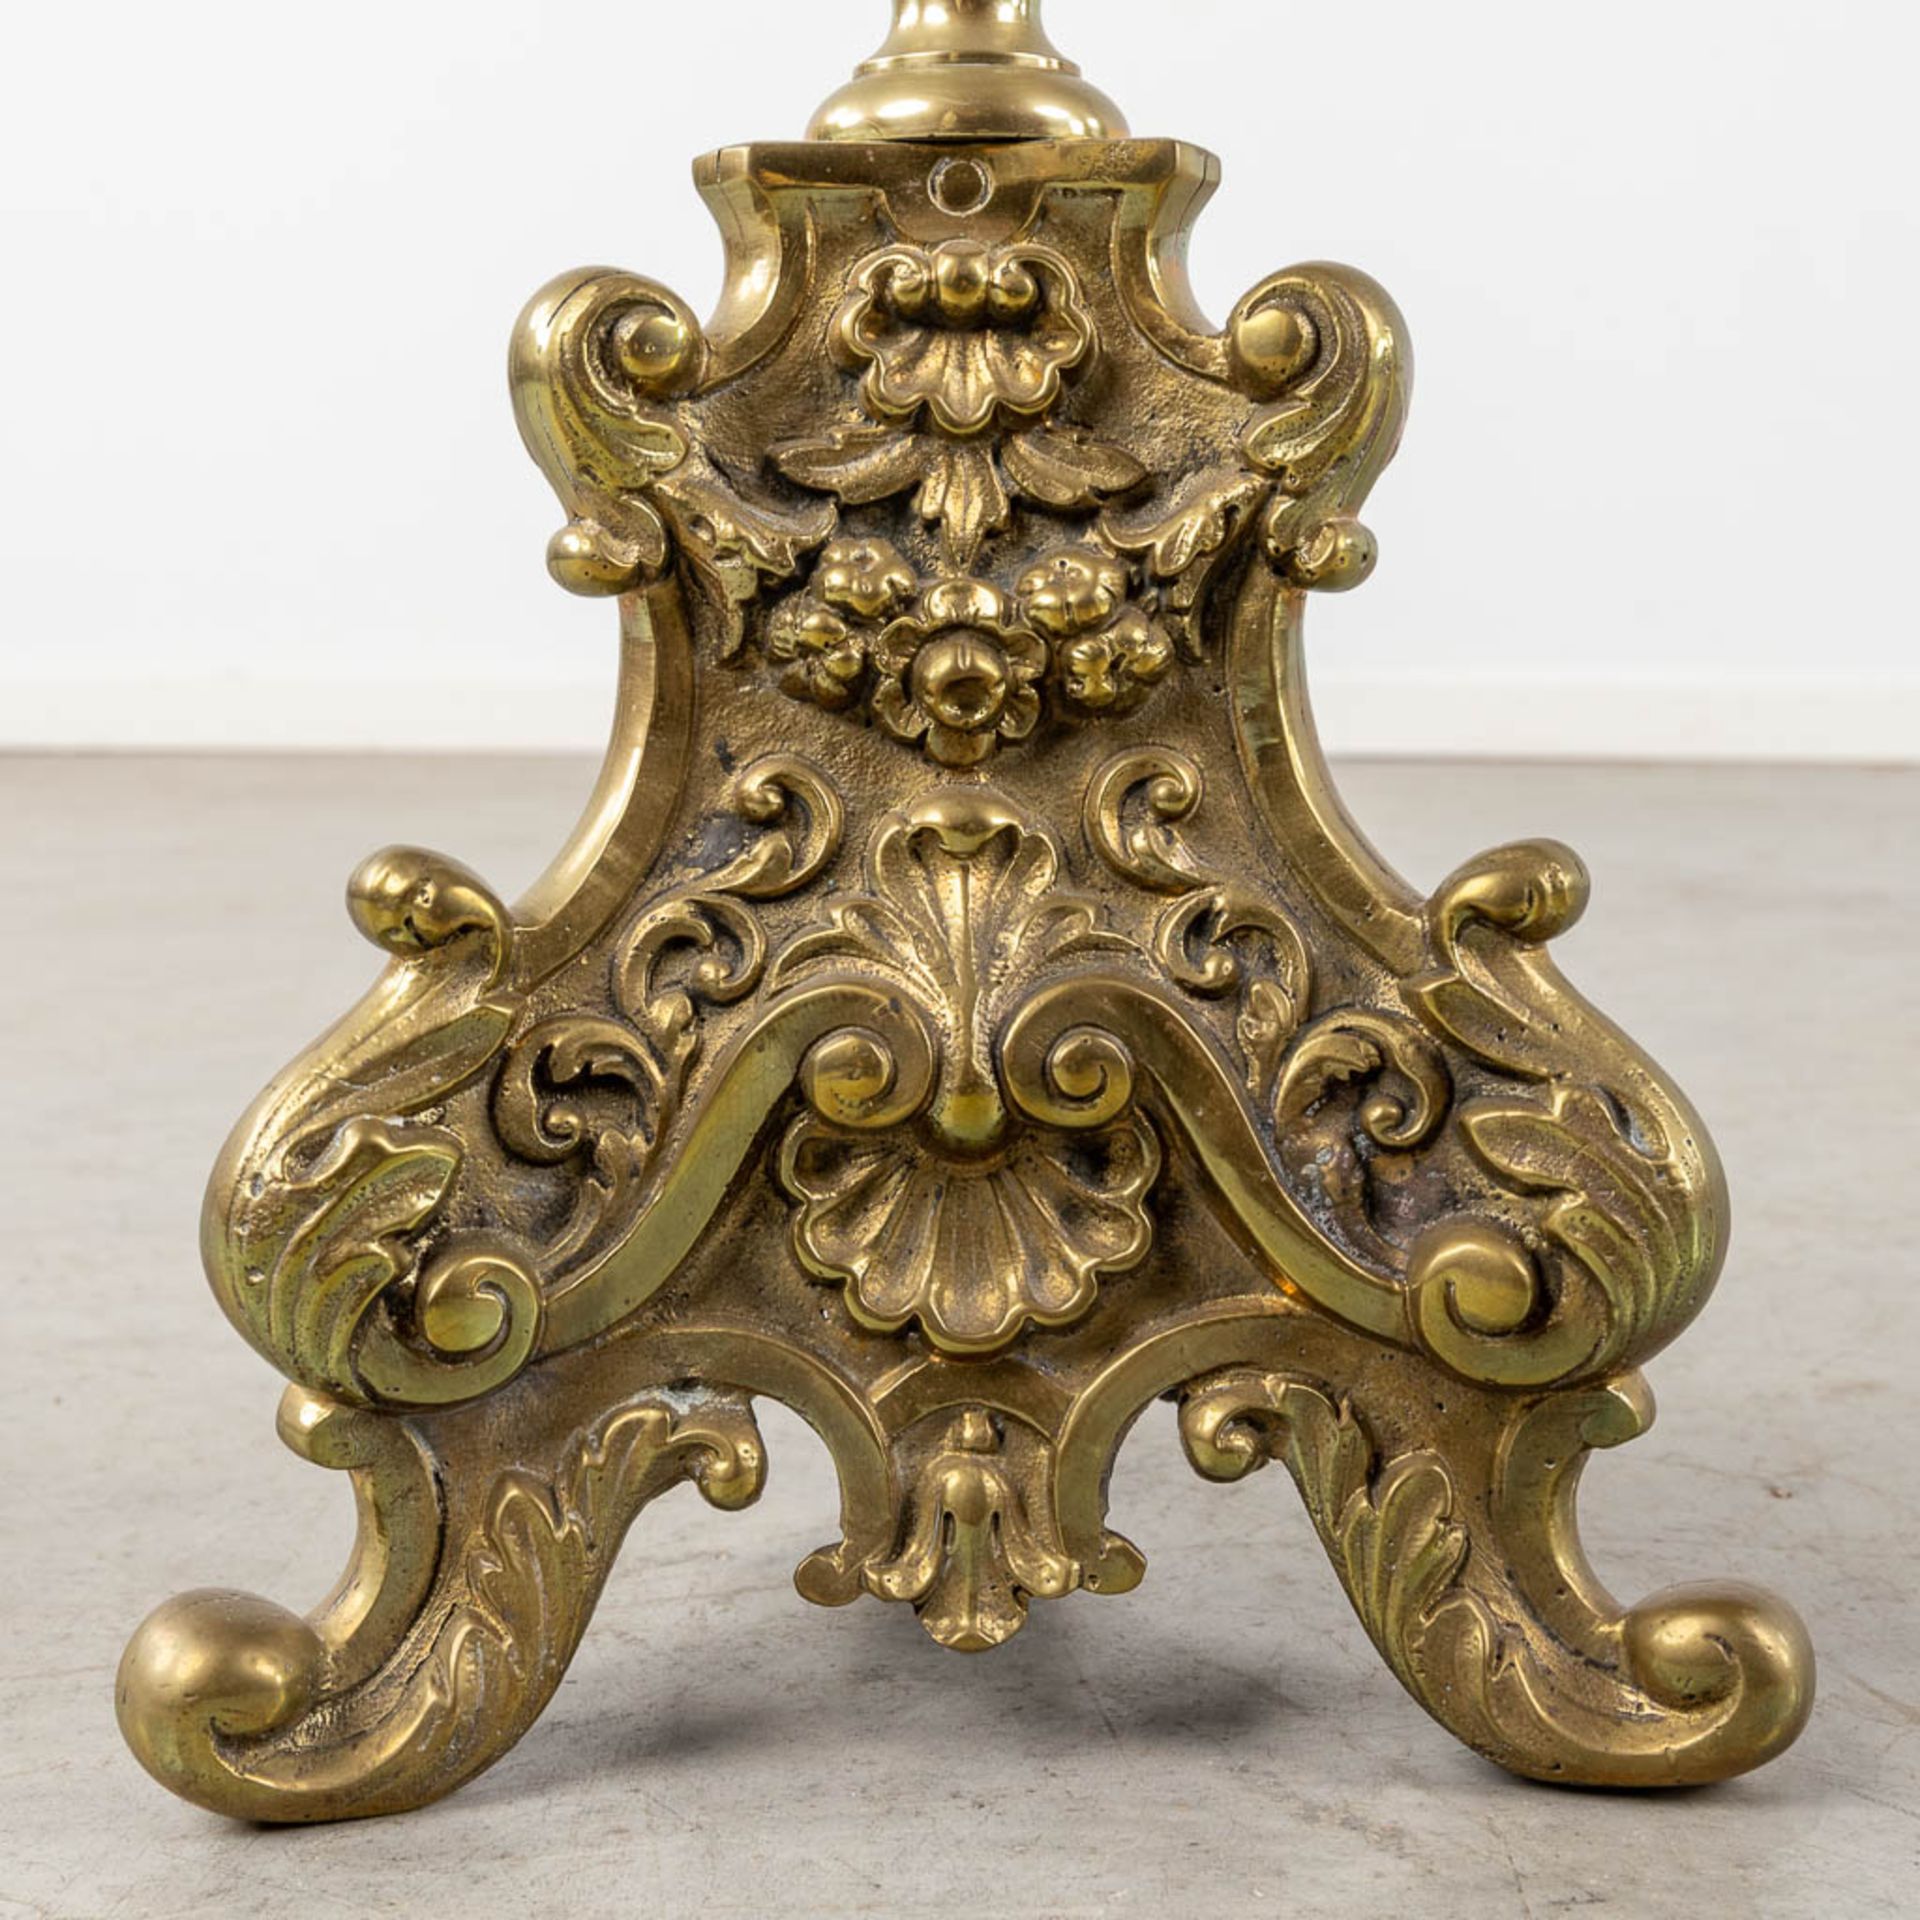 A pair of bronze church candlesticks/candle holders, Louis XV style. Circa 1900. (W:23 x H:105 cm) - Image 7 of 19